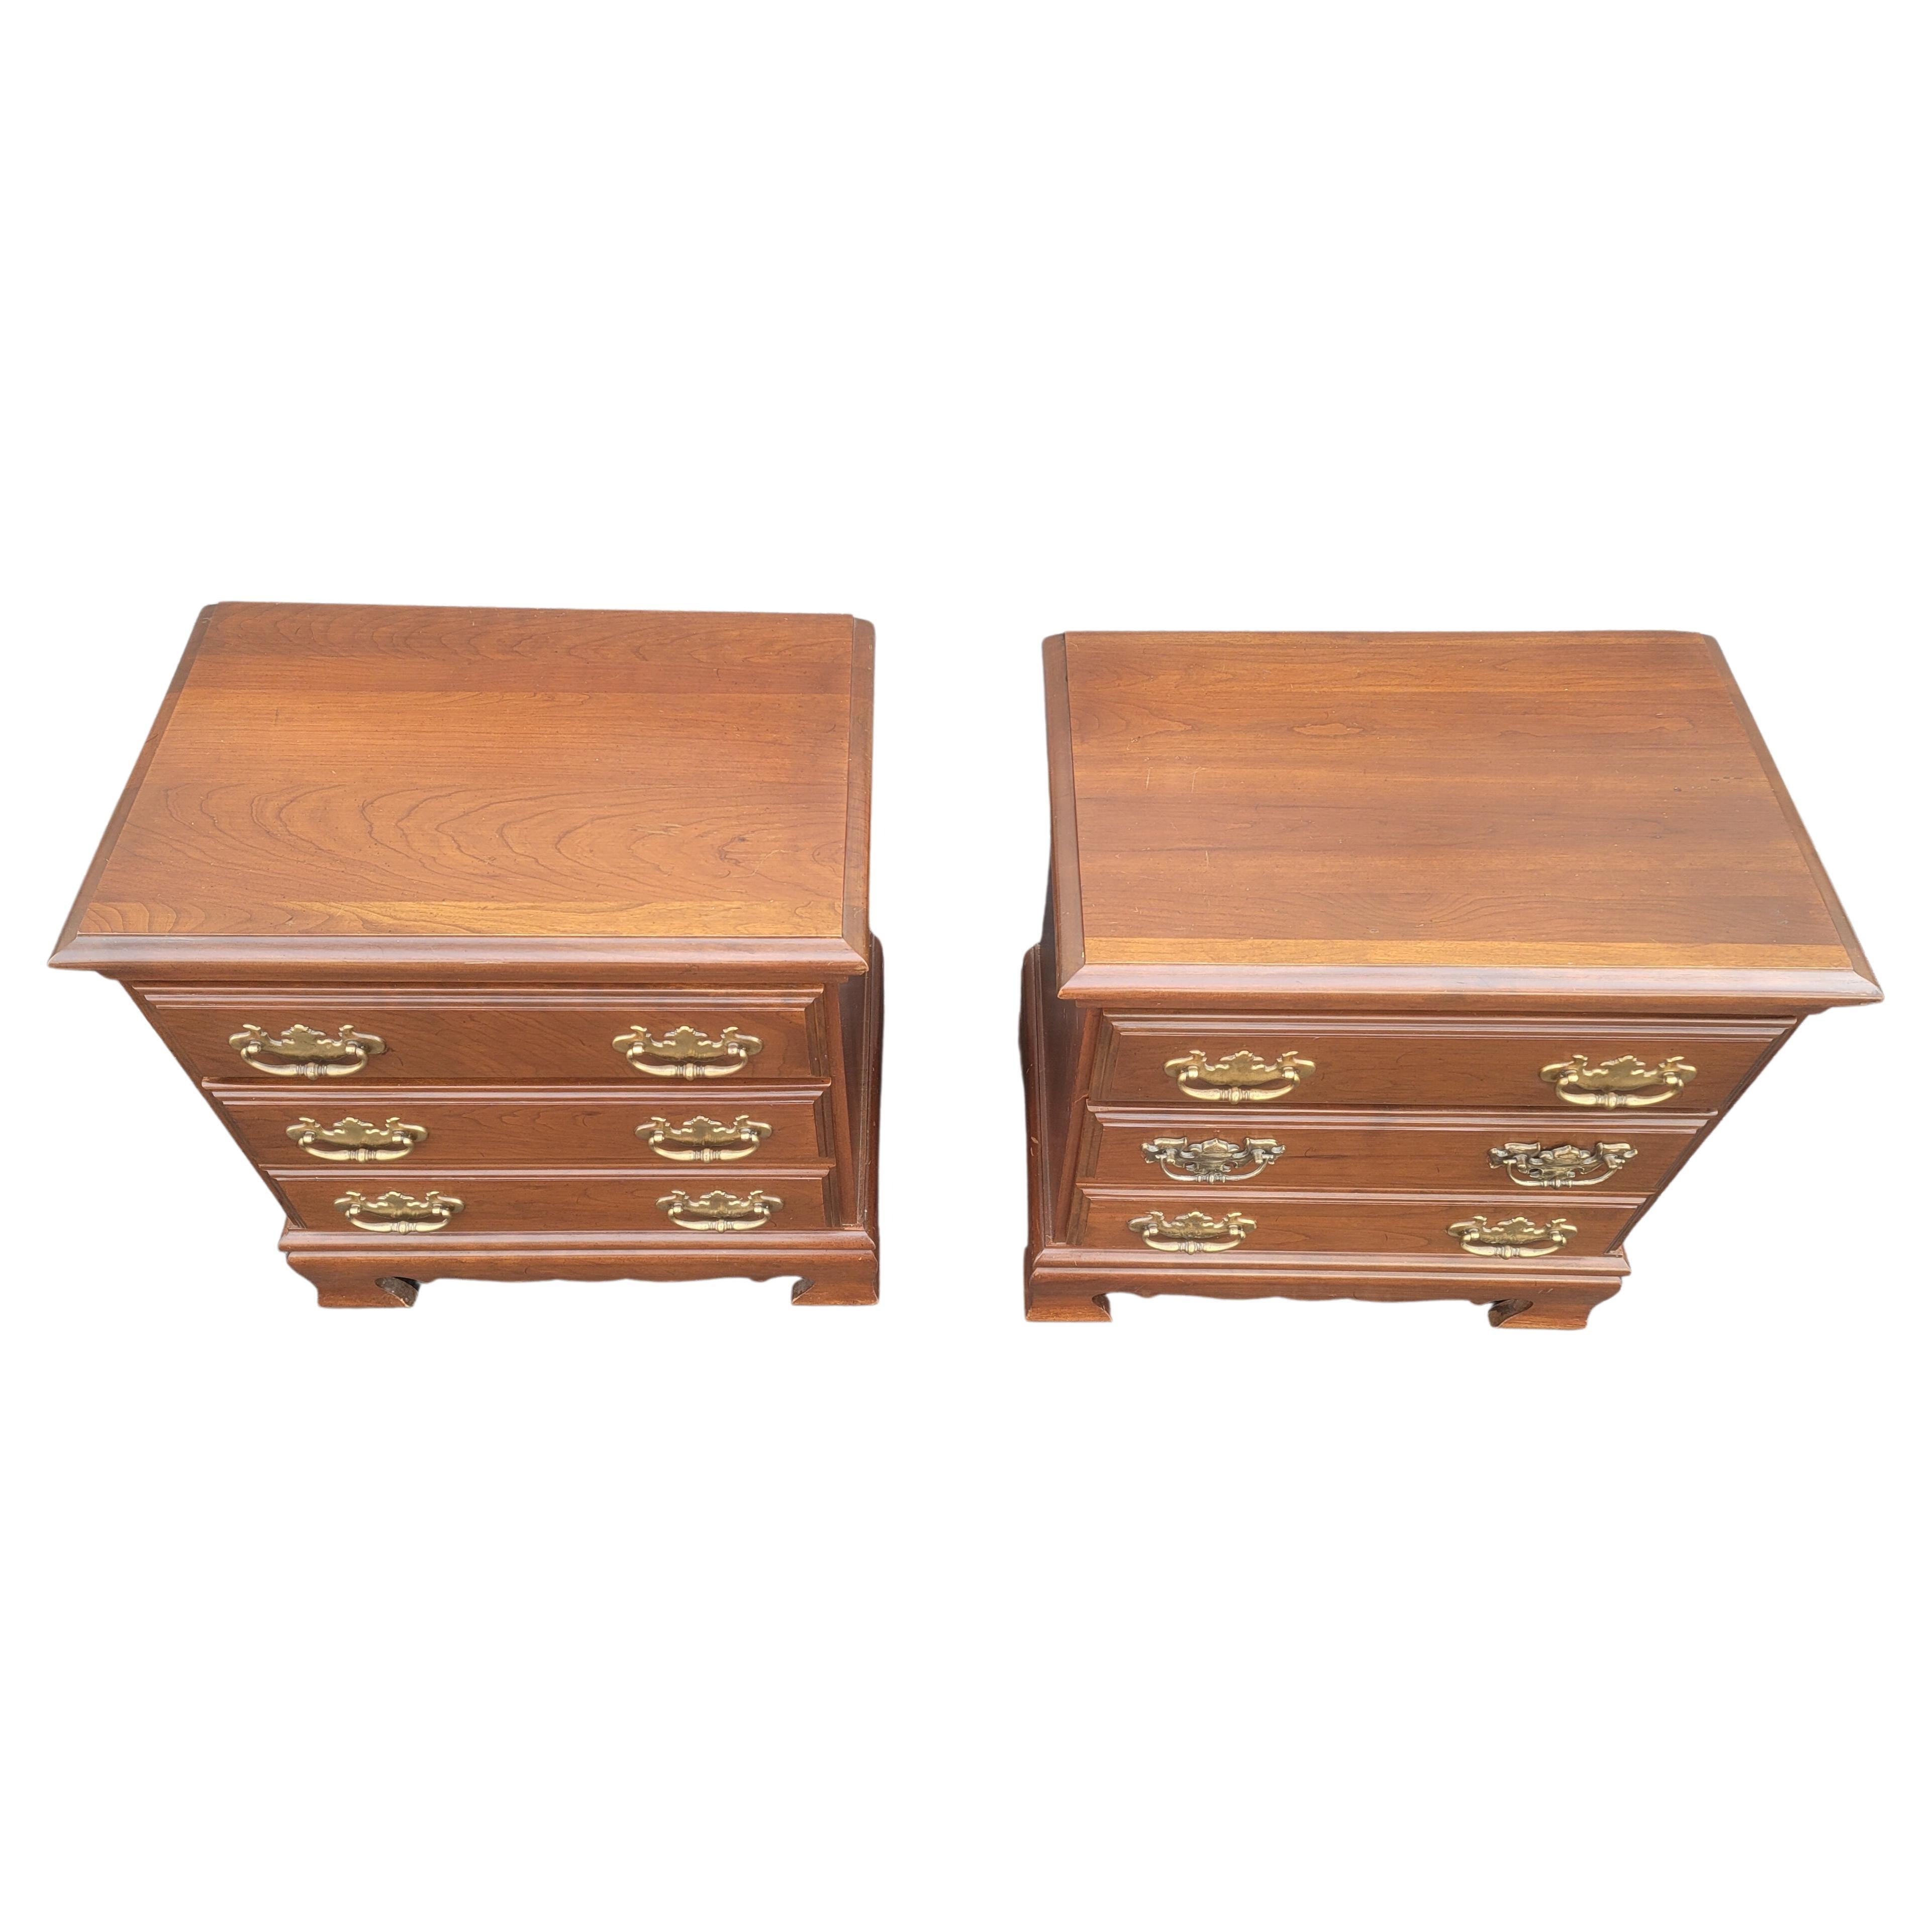 Beautiful pair of Chippendale Bedside chest of drawers or Nightstands. Good vintage condition measuring 24